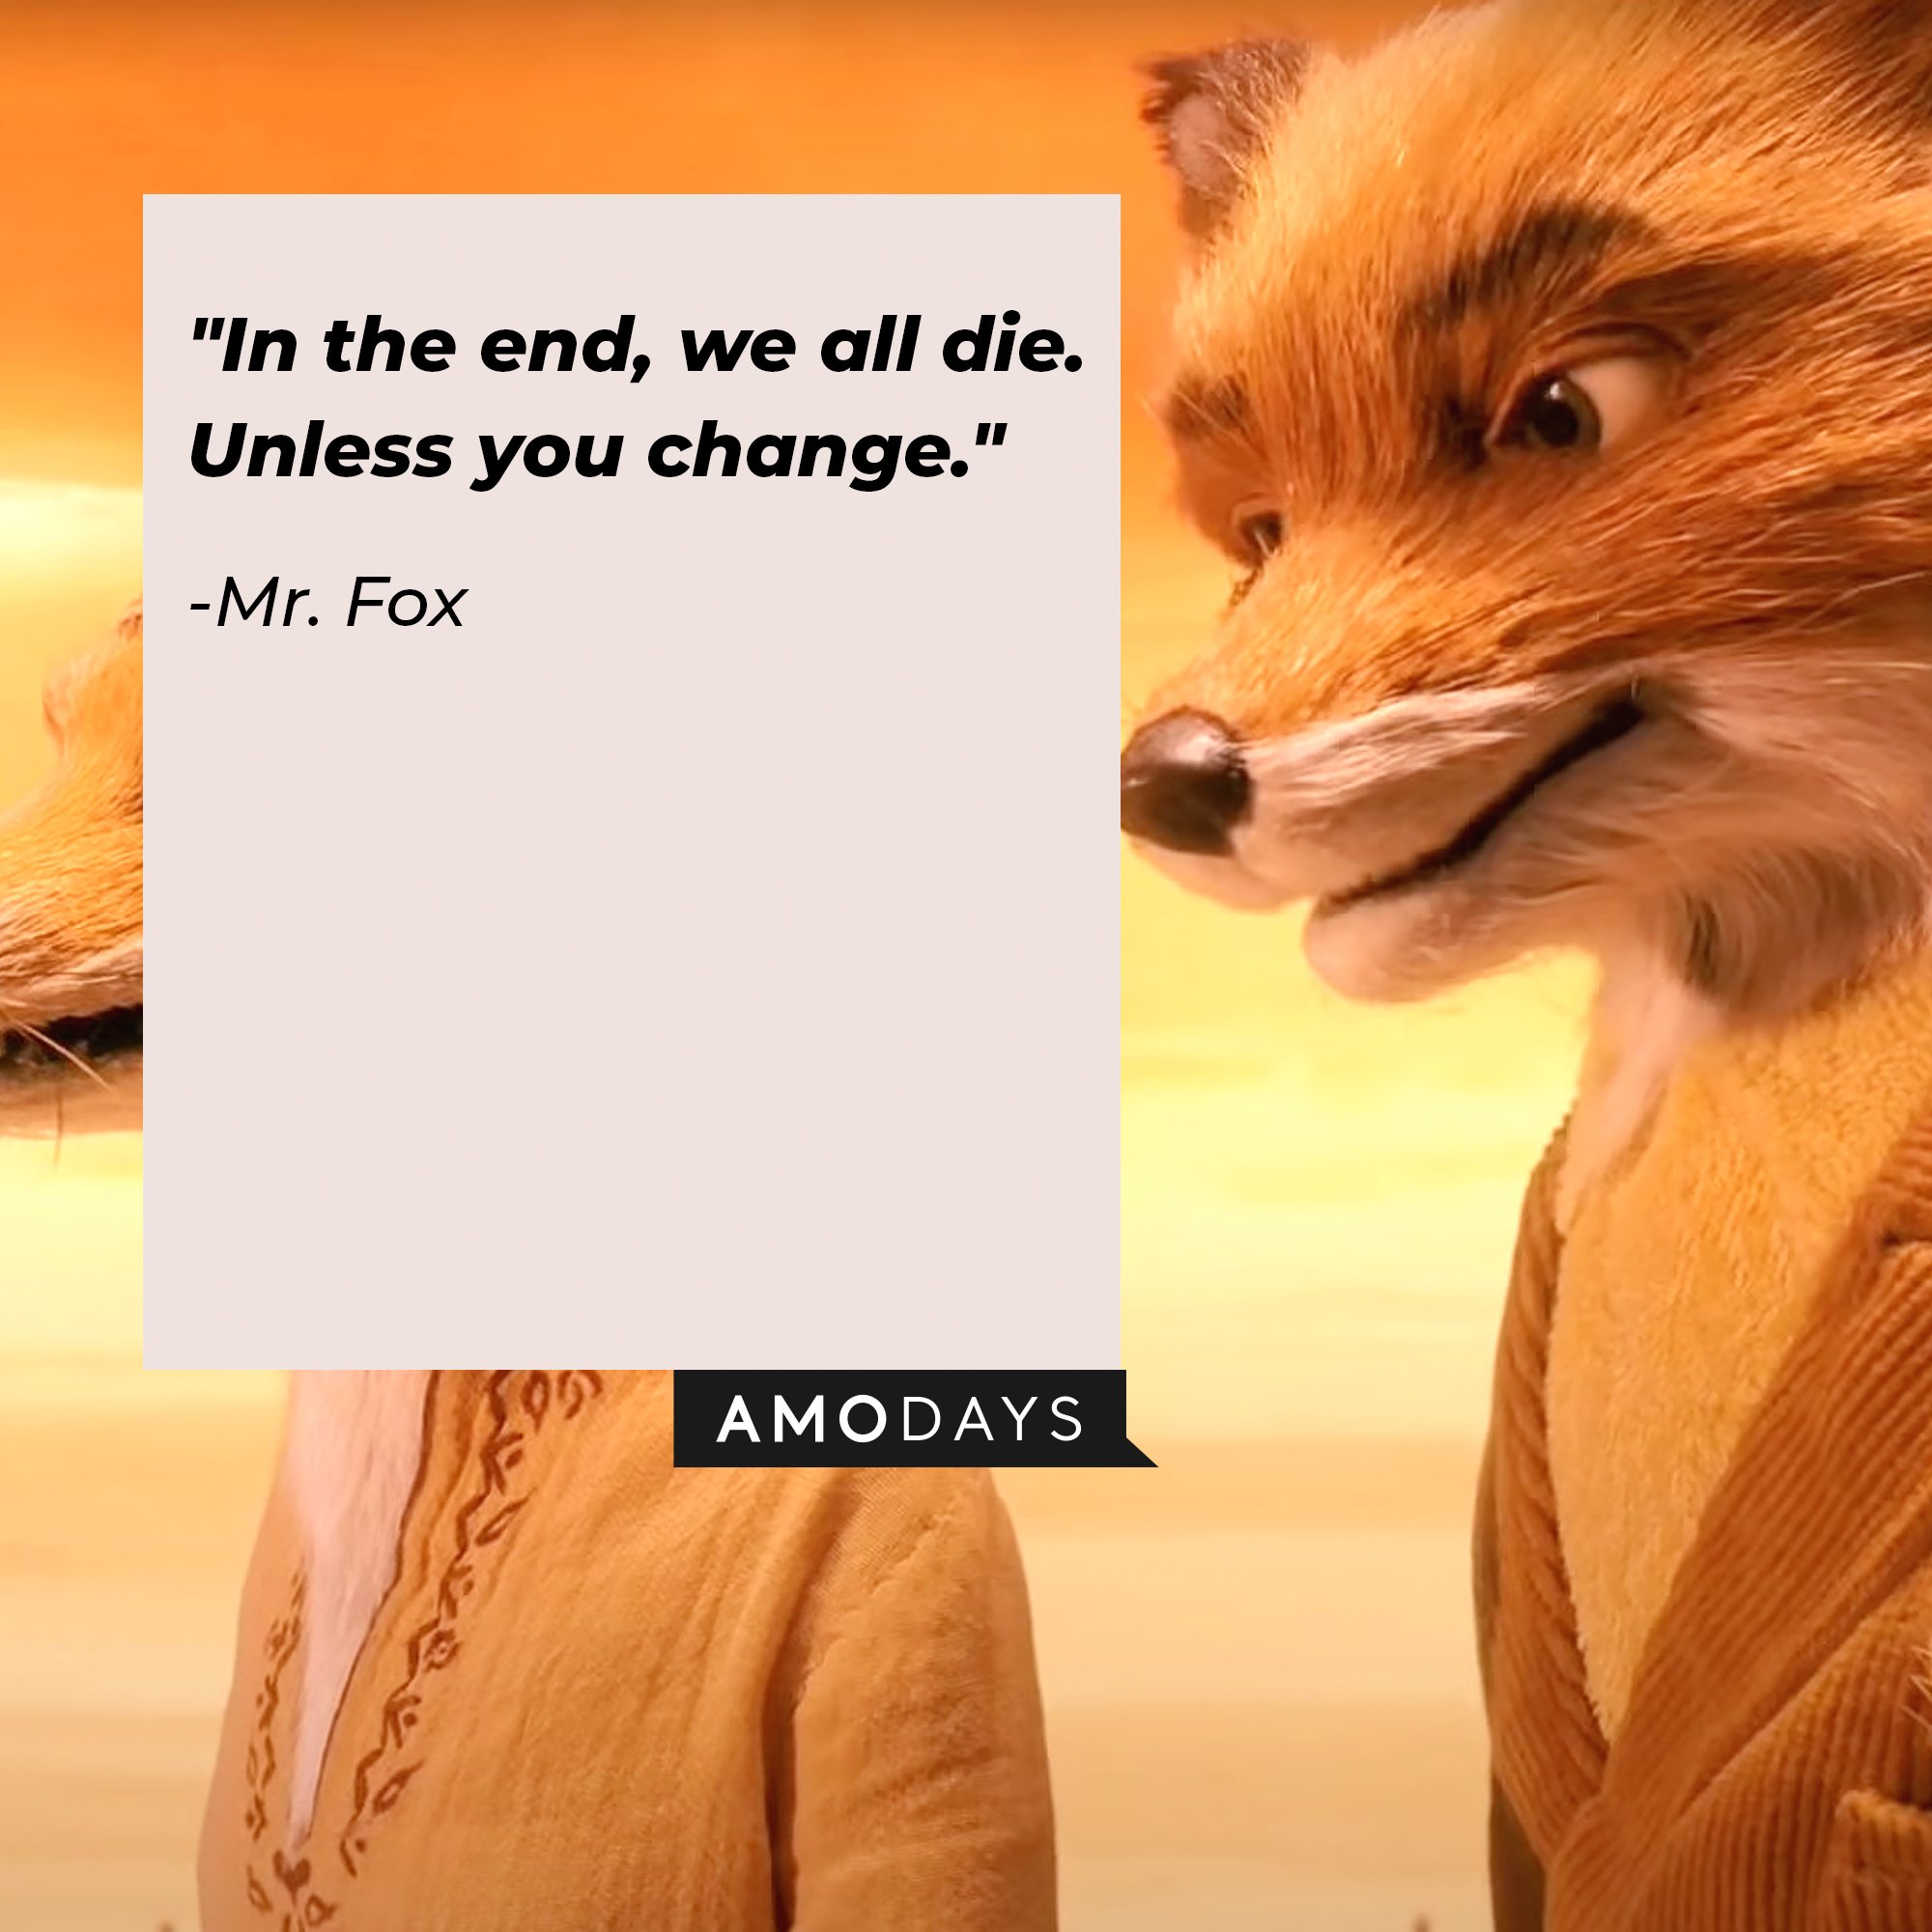  Mr. Fox's Quote: "In the end, we all die. Unless you change." | Image: AmoDays